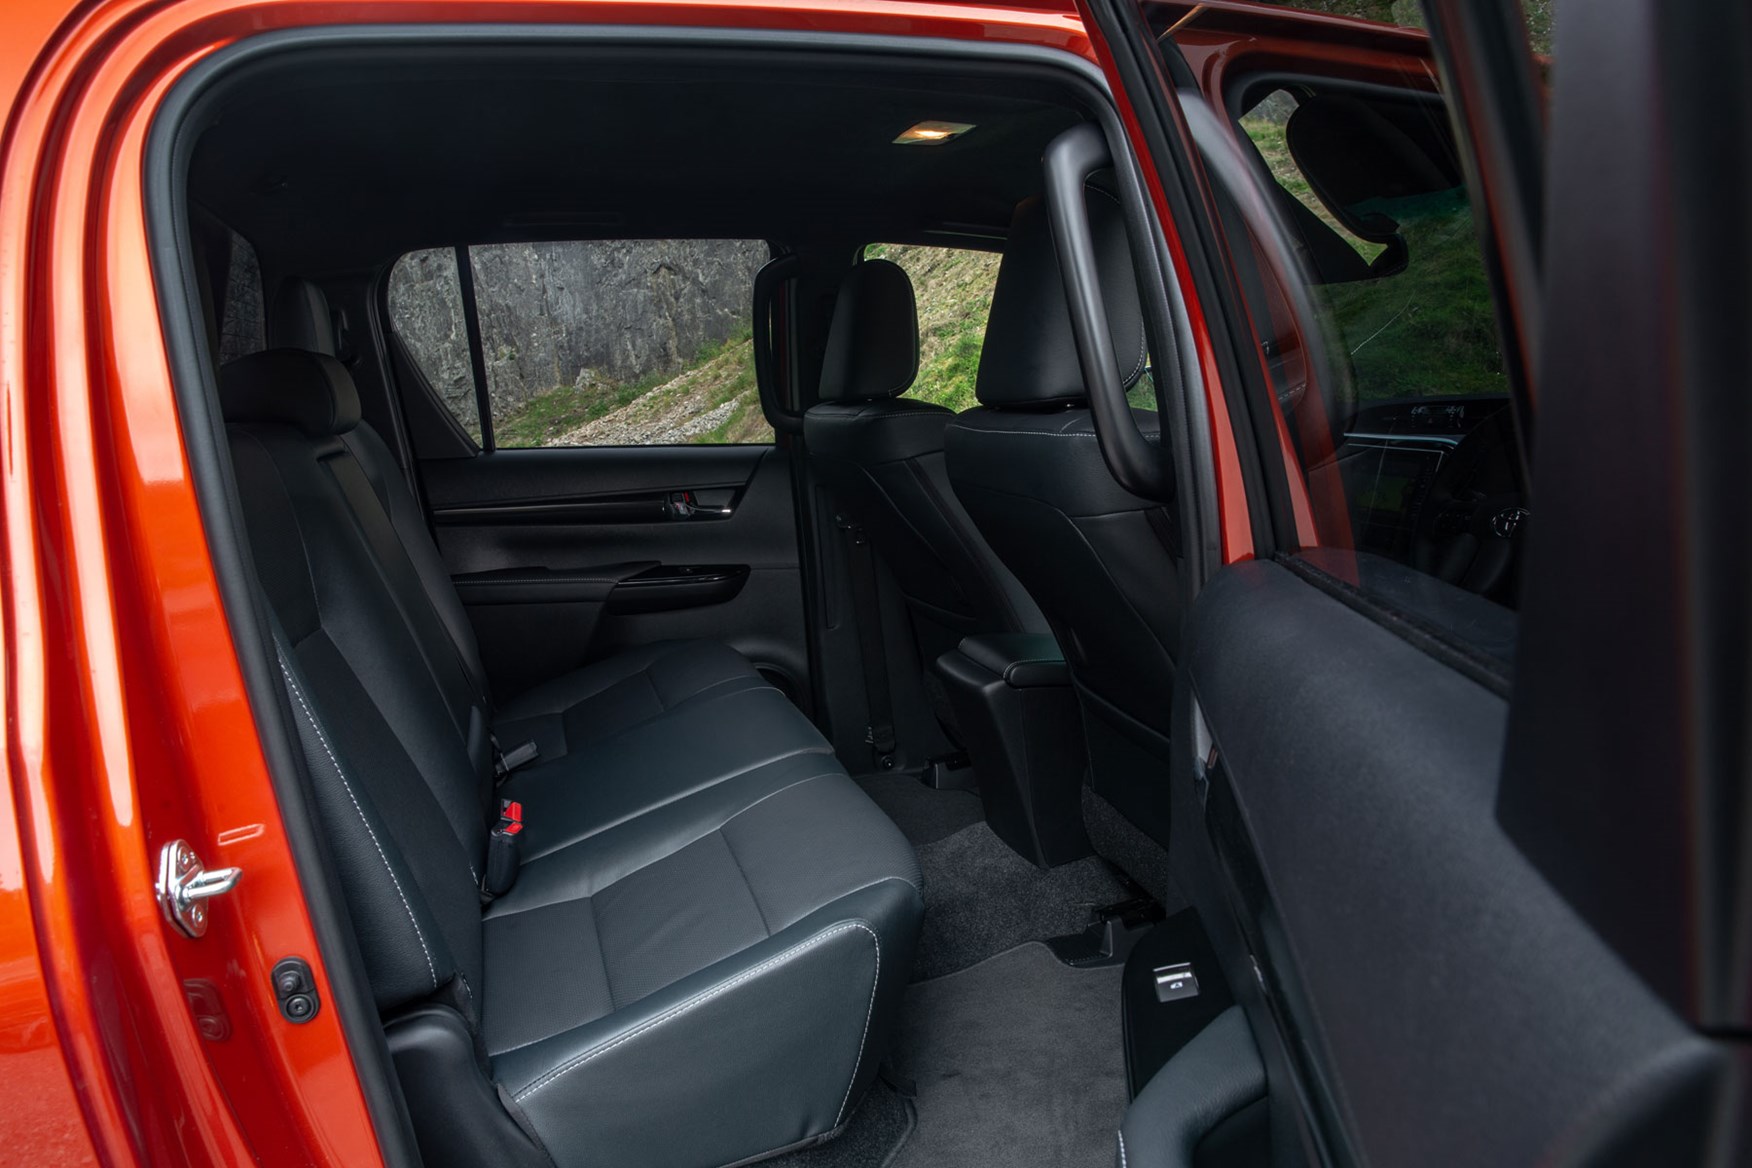 Toyota Hilux review - Double Cab rear seats and door opening